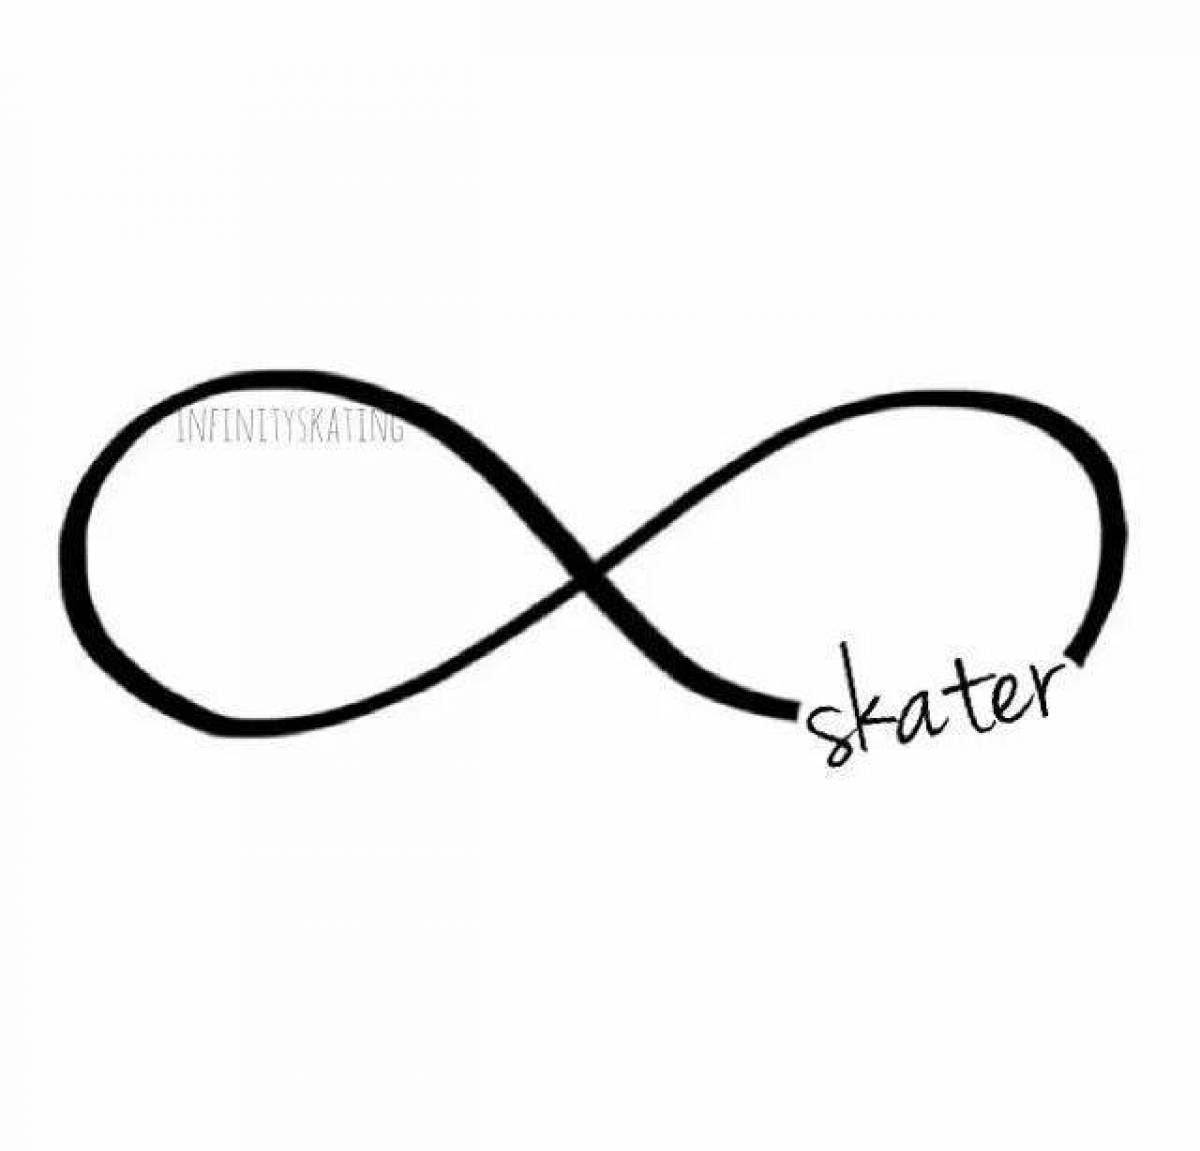 Gorgeous Infinity Skate coloring page